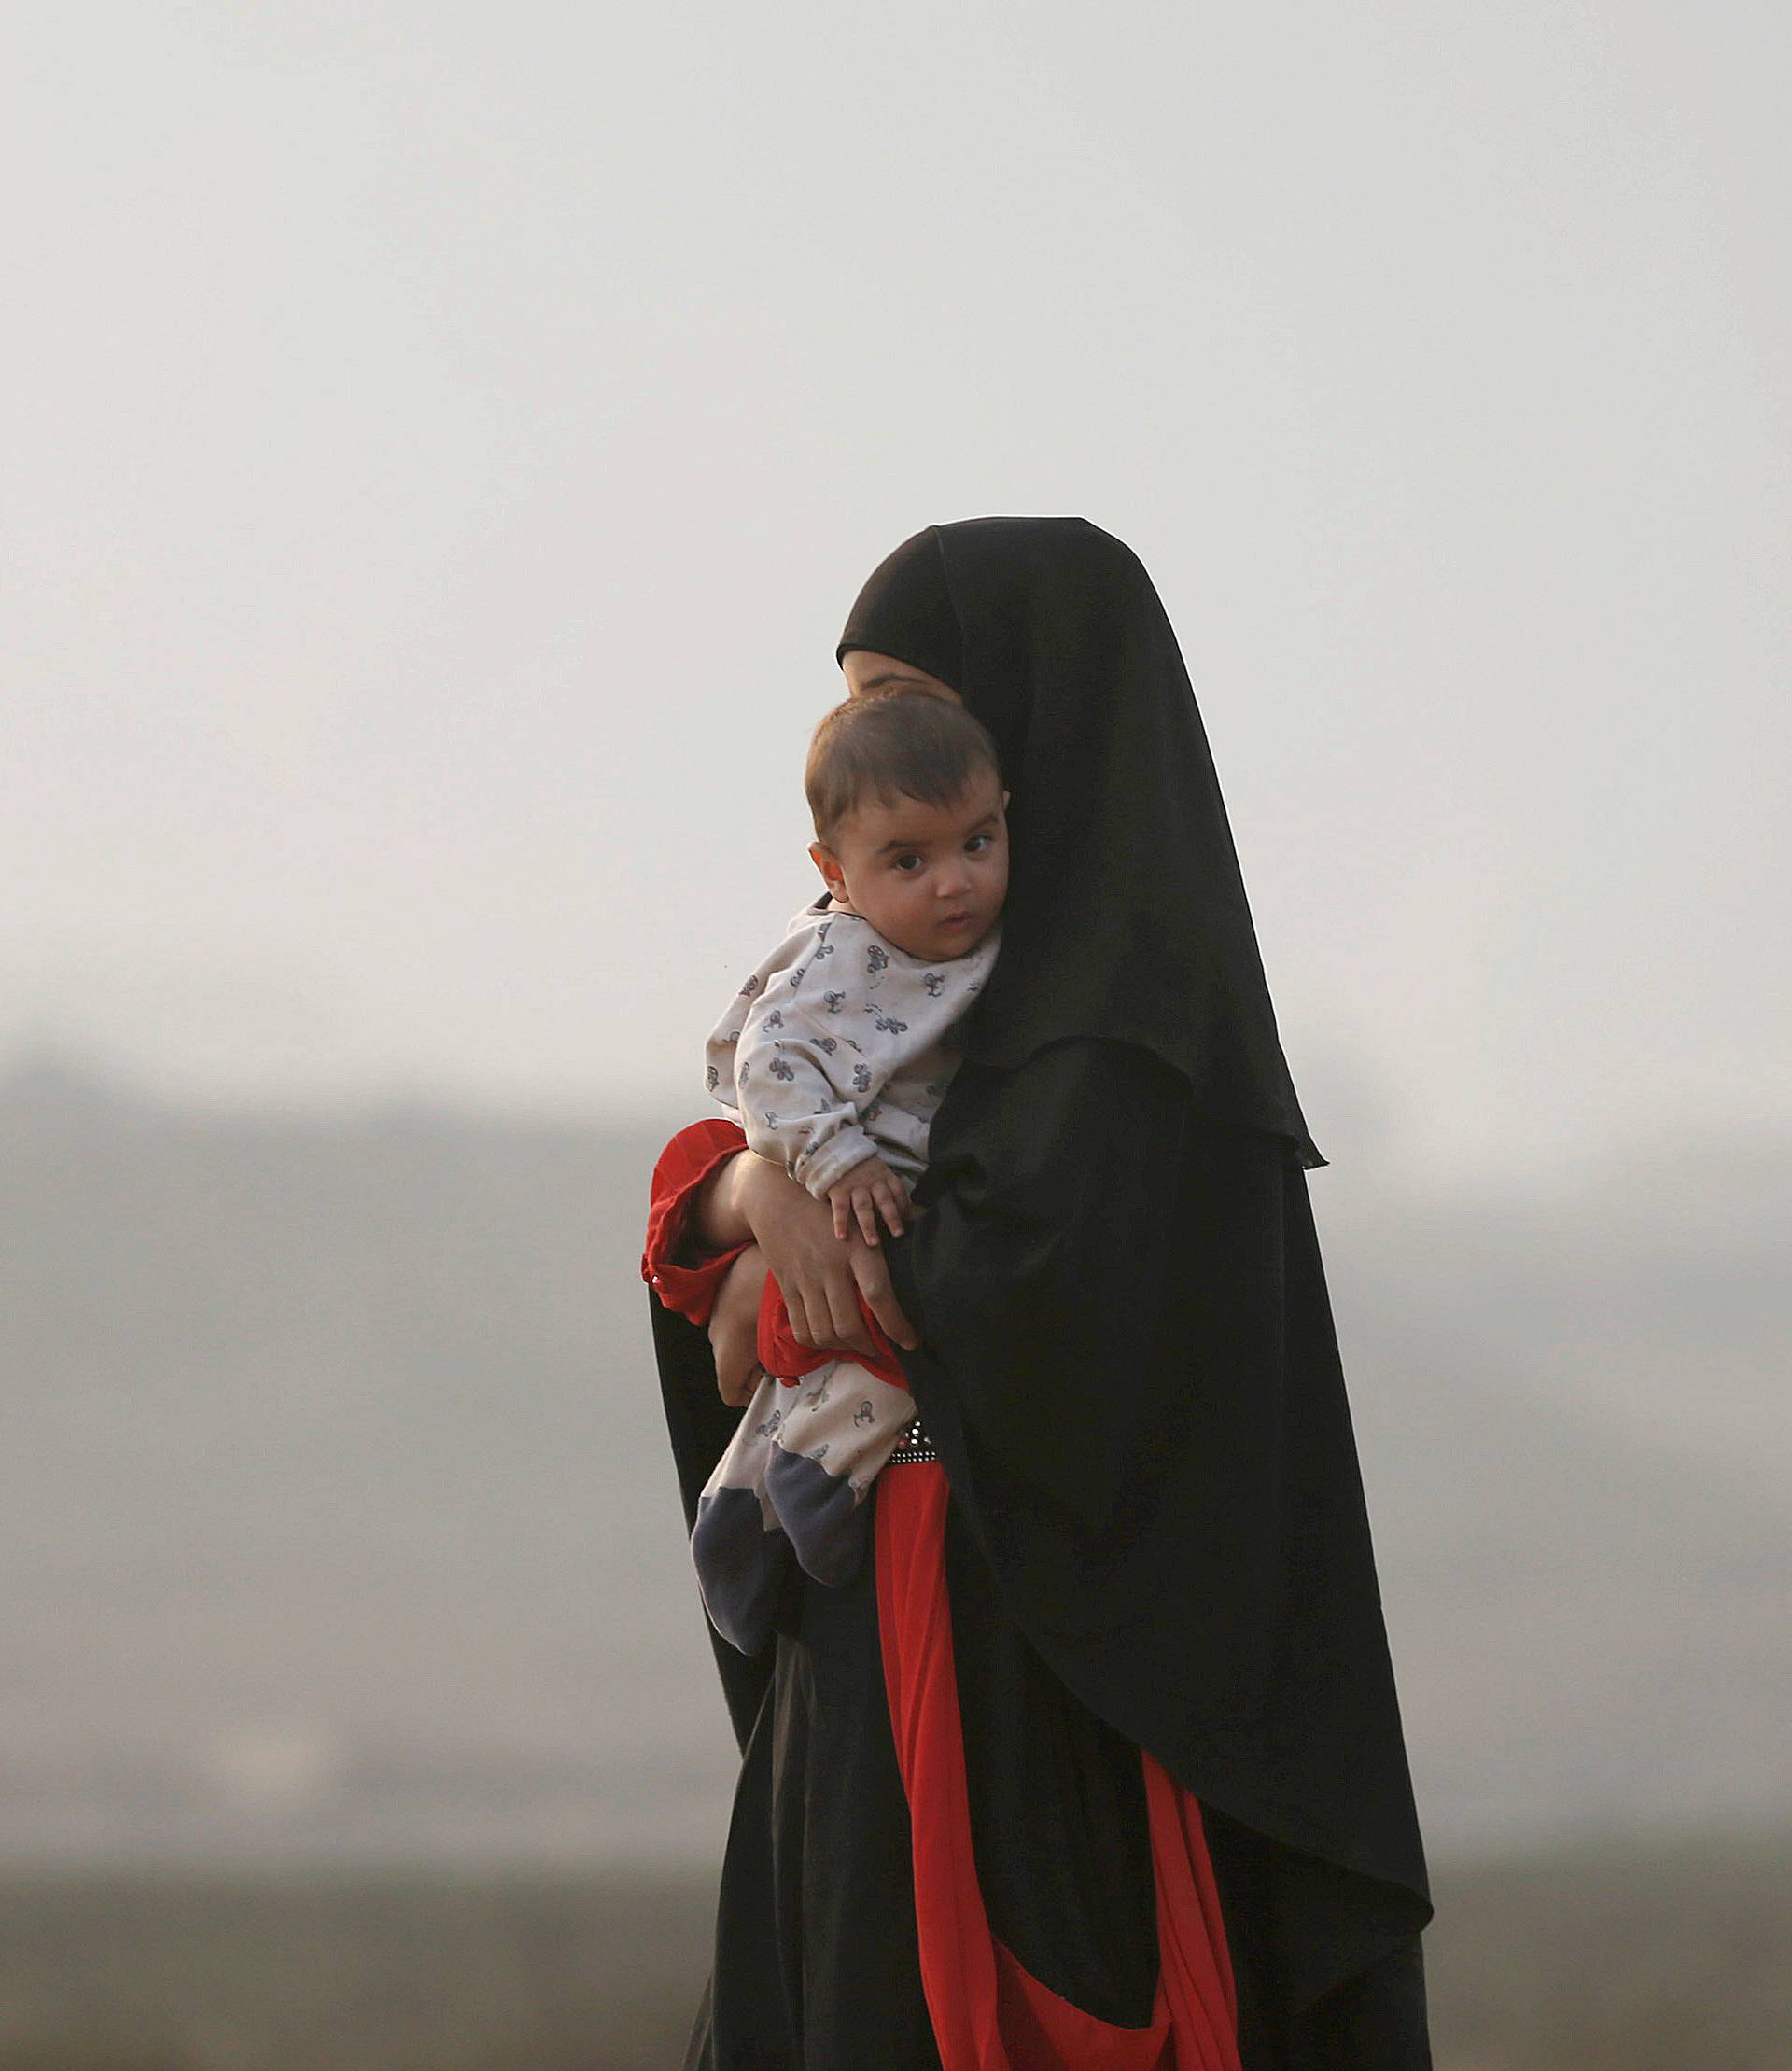 A newly displaced woman carries her child at a check point in Qayyara, east of Mosul